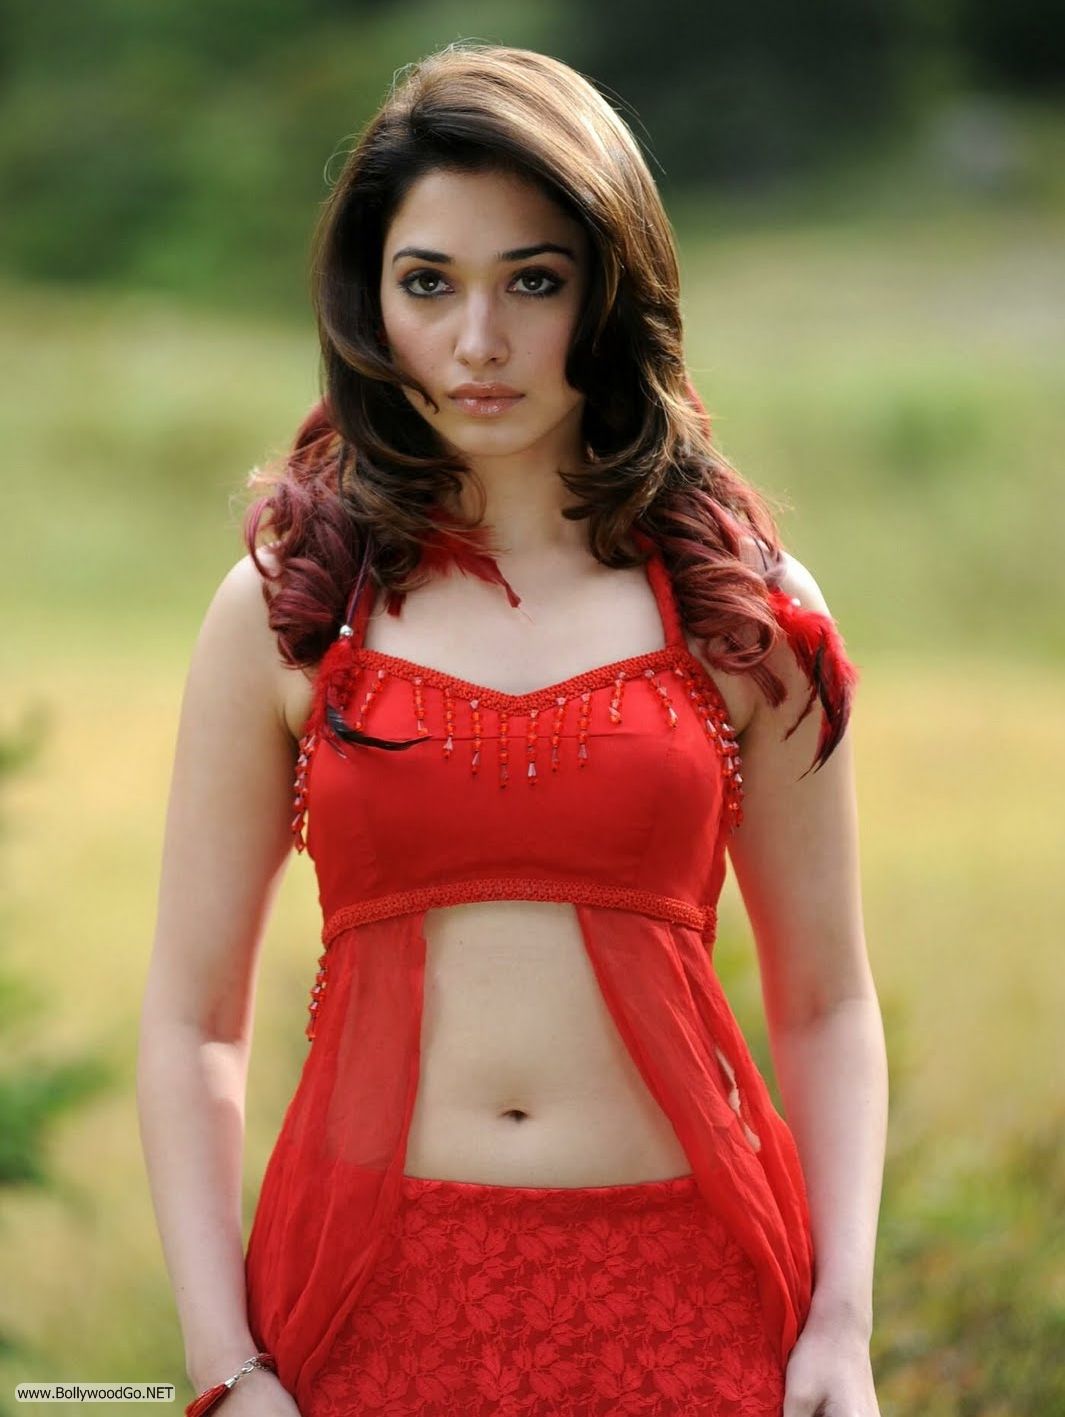 Spicy Tamanna Bhatia Pictures | Hot Celebrity Pic